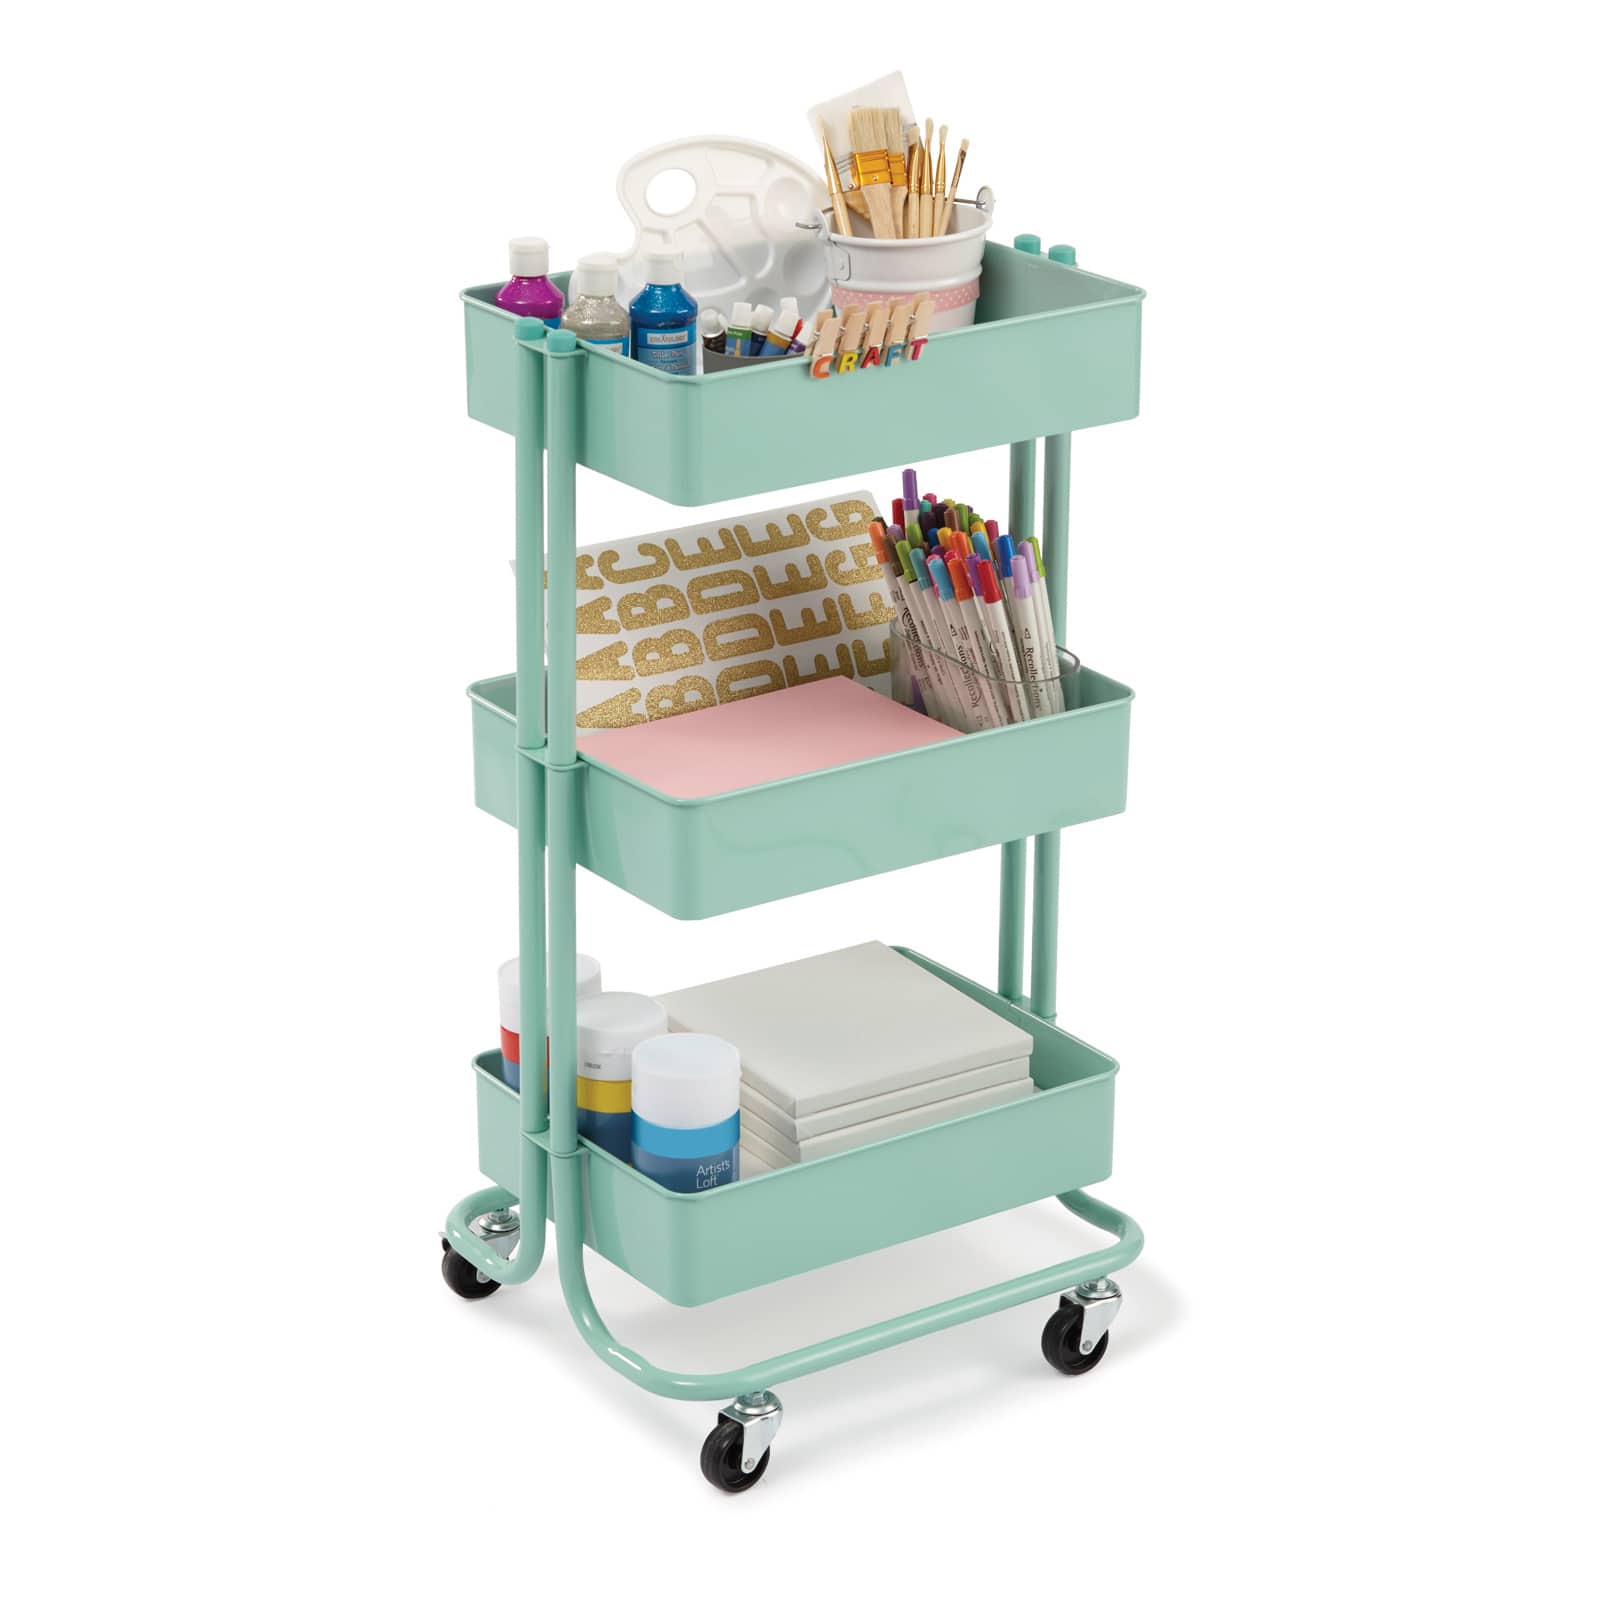 3-tier rolling cart with baskets